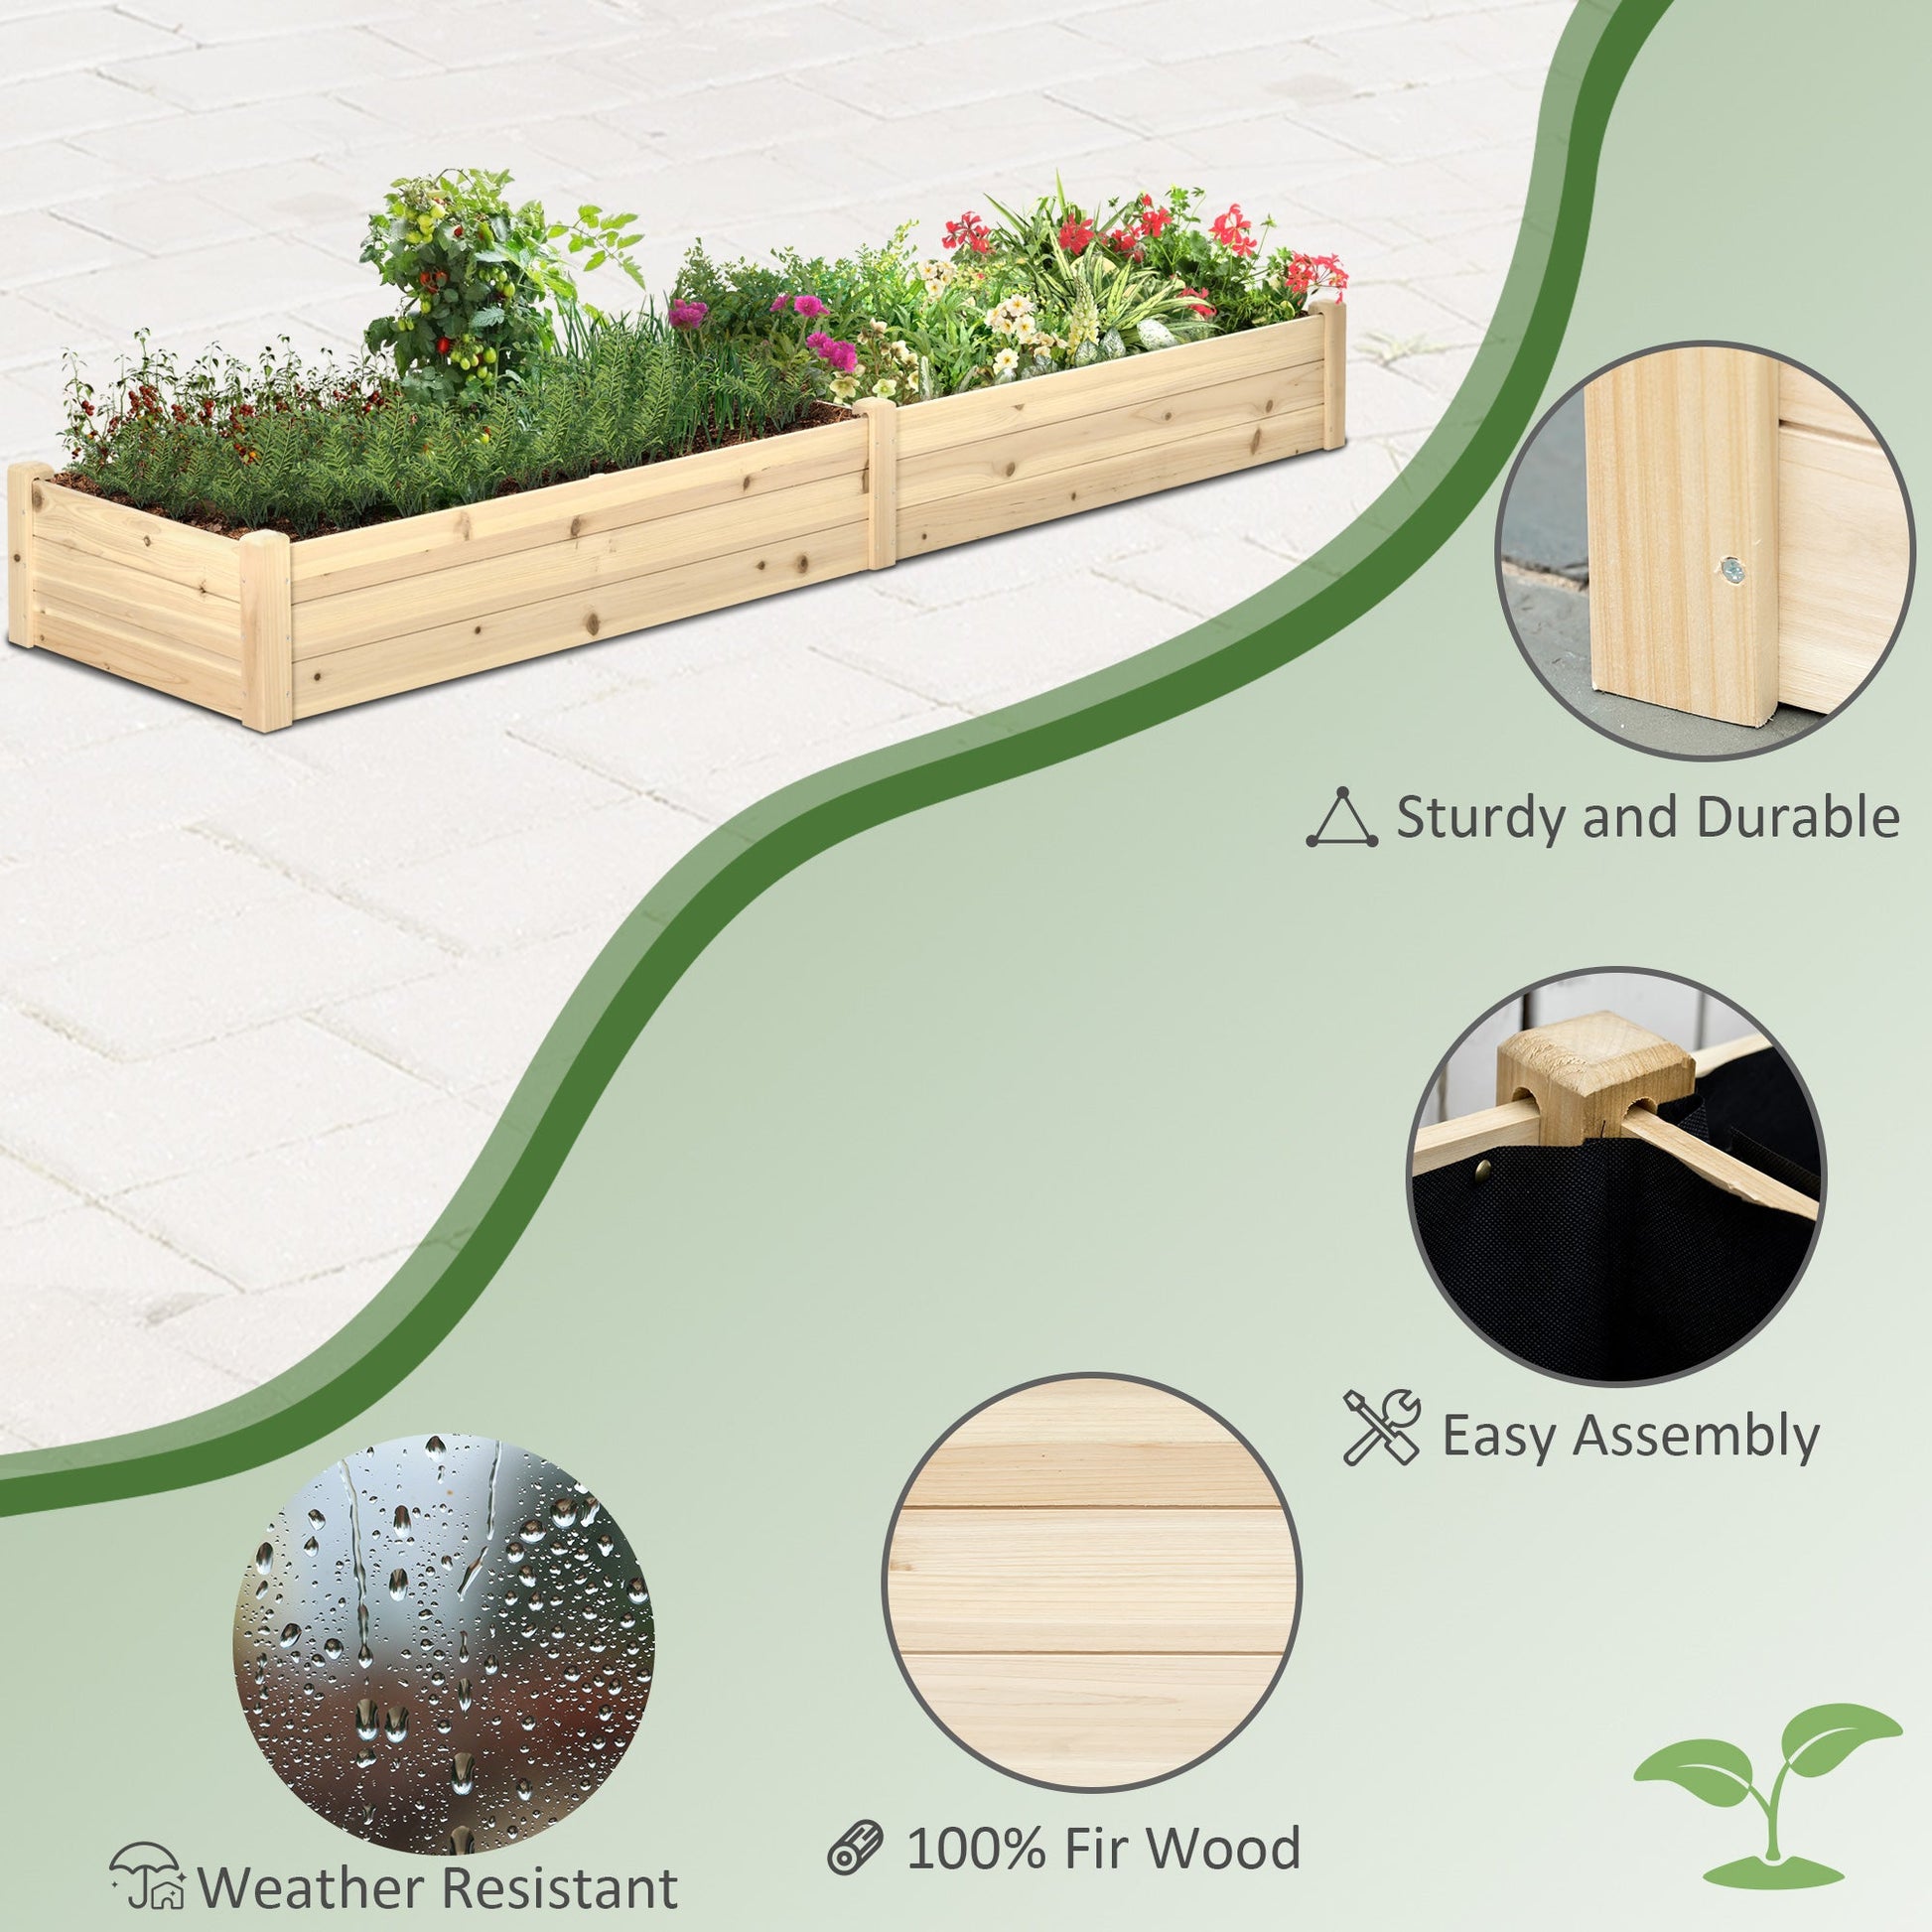 96" x 24" x 10" Wooden Raised Garden Bed with 2 Planter Box and Non-woven Fabric Liner for Backyard, Patio to Grow Vegetables, Herbs, and Flowers at Gallery Canada